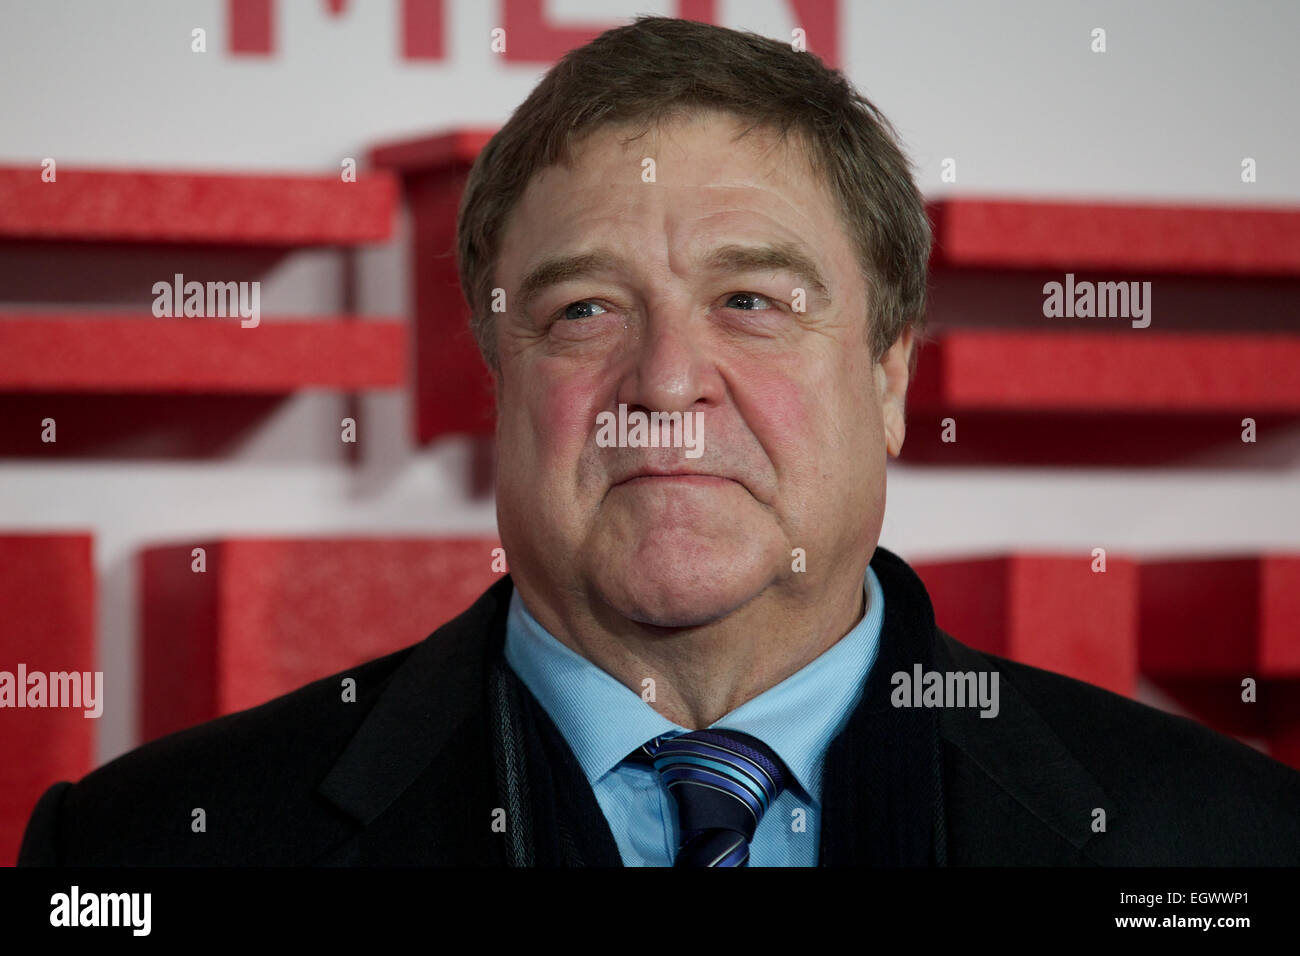 UNITED KINGDOM, London : American actor John Goodman poses for a photo call in front of 'Cupid complaining to Venus' by Lucas Cranach which was a painting that belonged in Hitlers private collection, in conjunction with the film 'The Monument men' in central London on February 11, 2014 Stock Photo